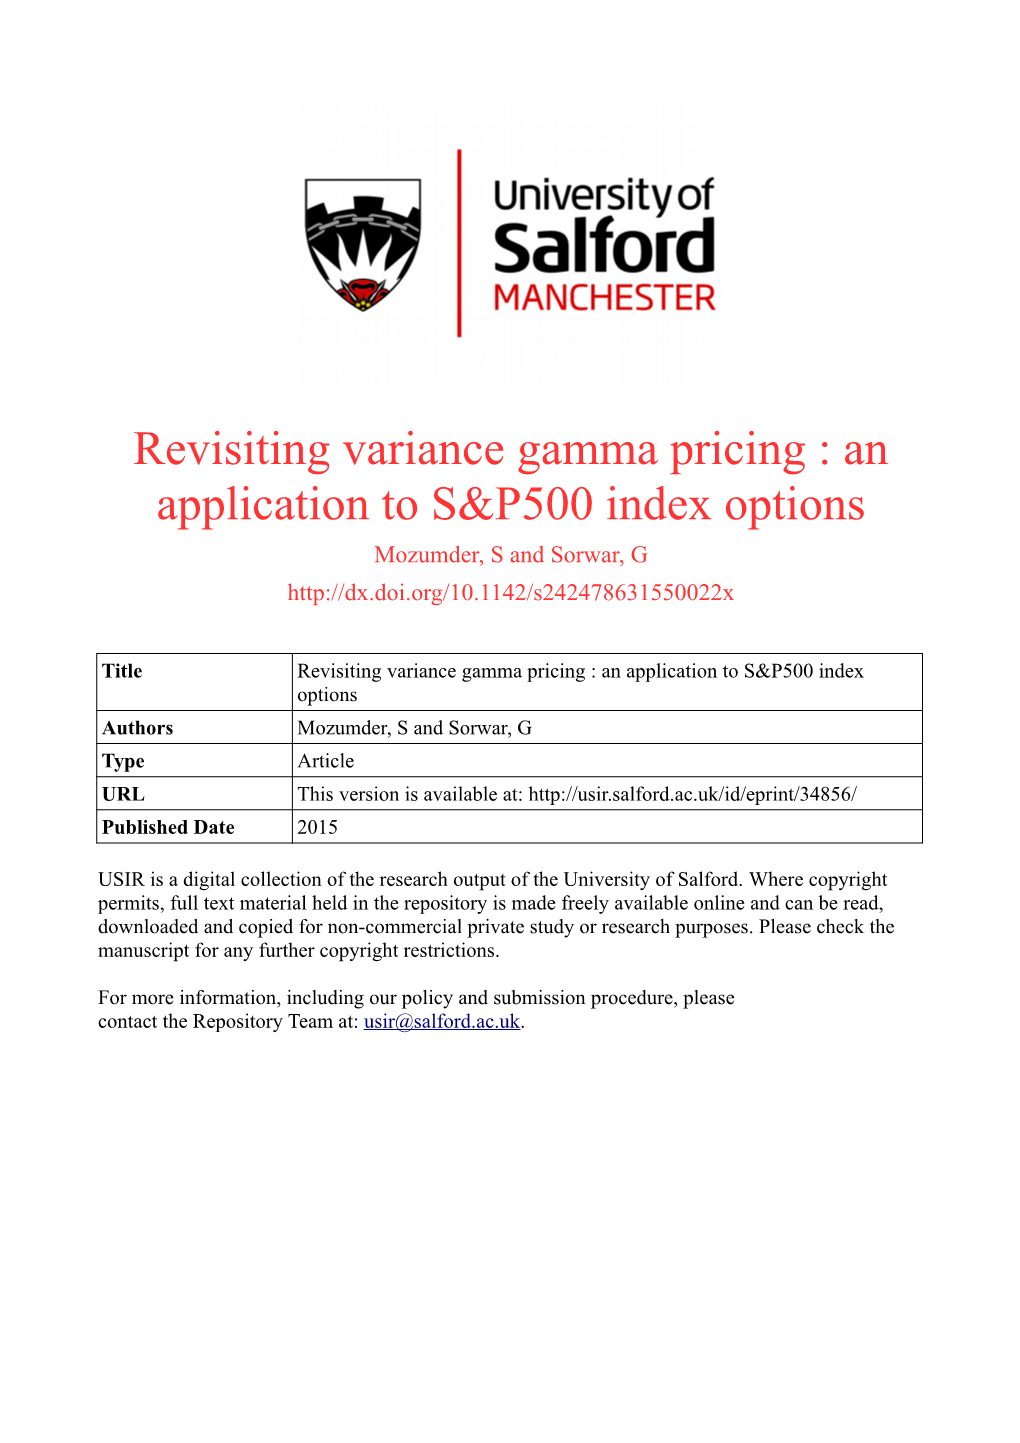 Revisiting Variance Gamma Pricing : an Application to S&P500 Index Options Mozumder, S and Sorwar, G